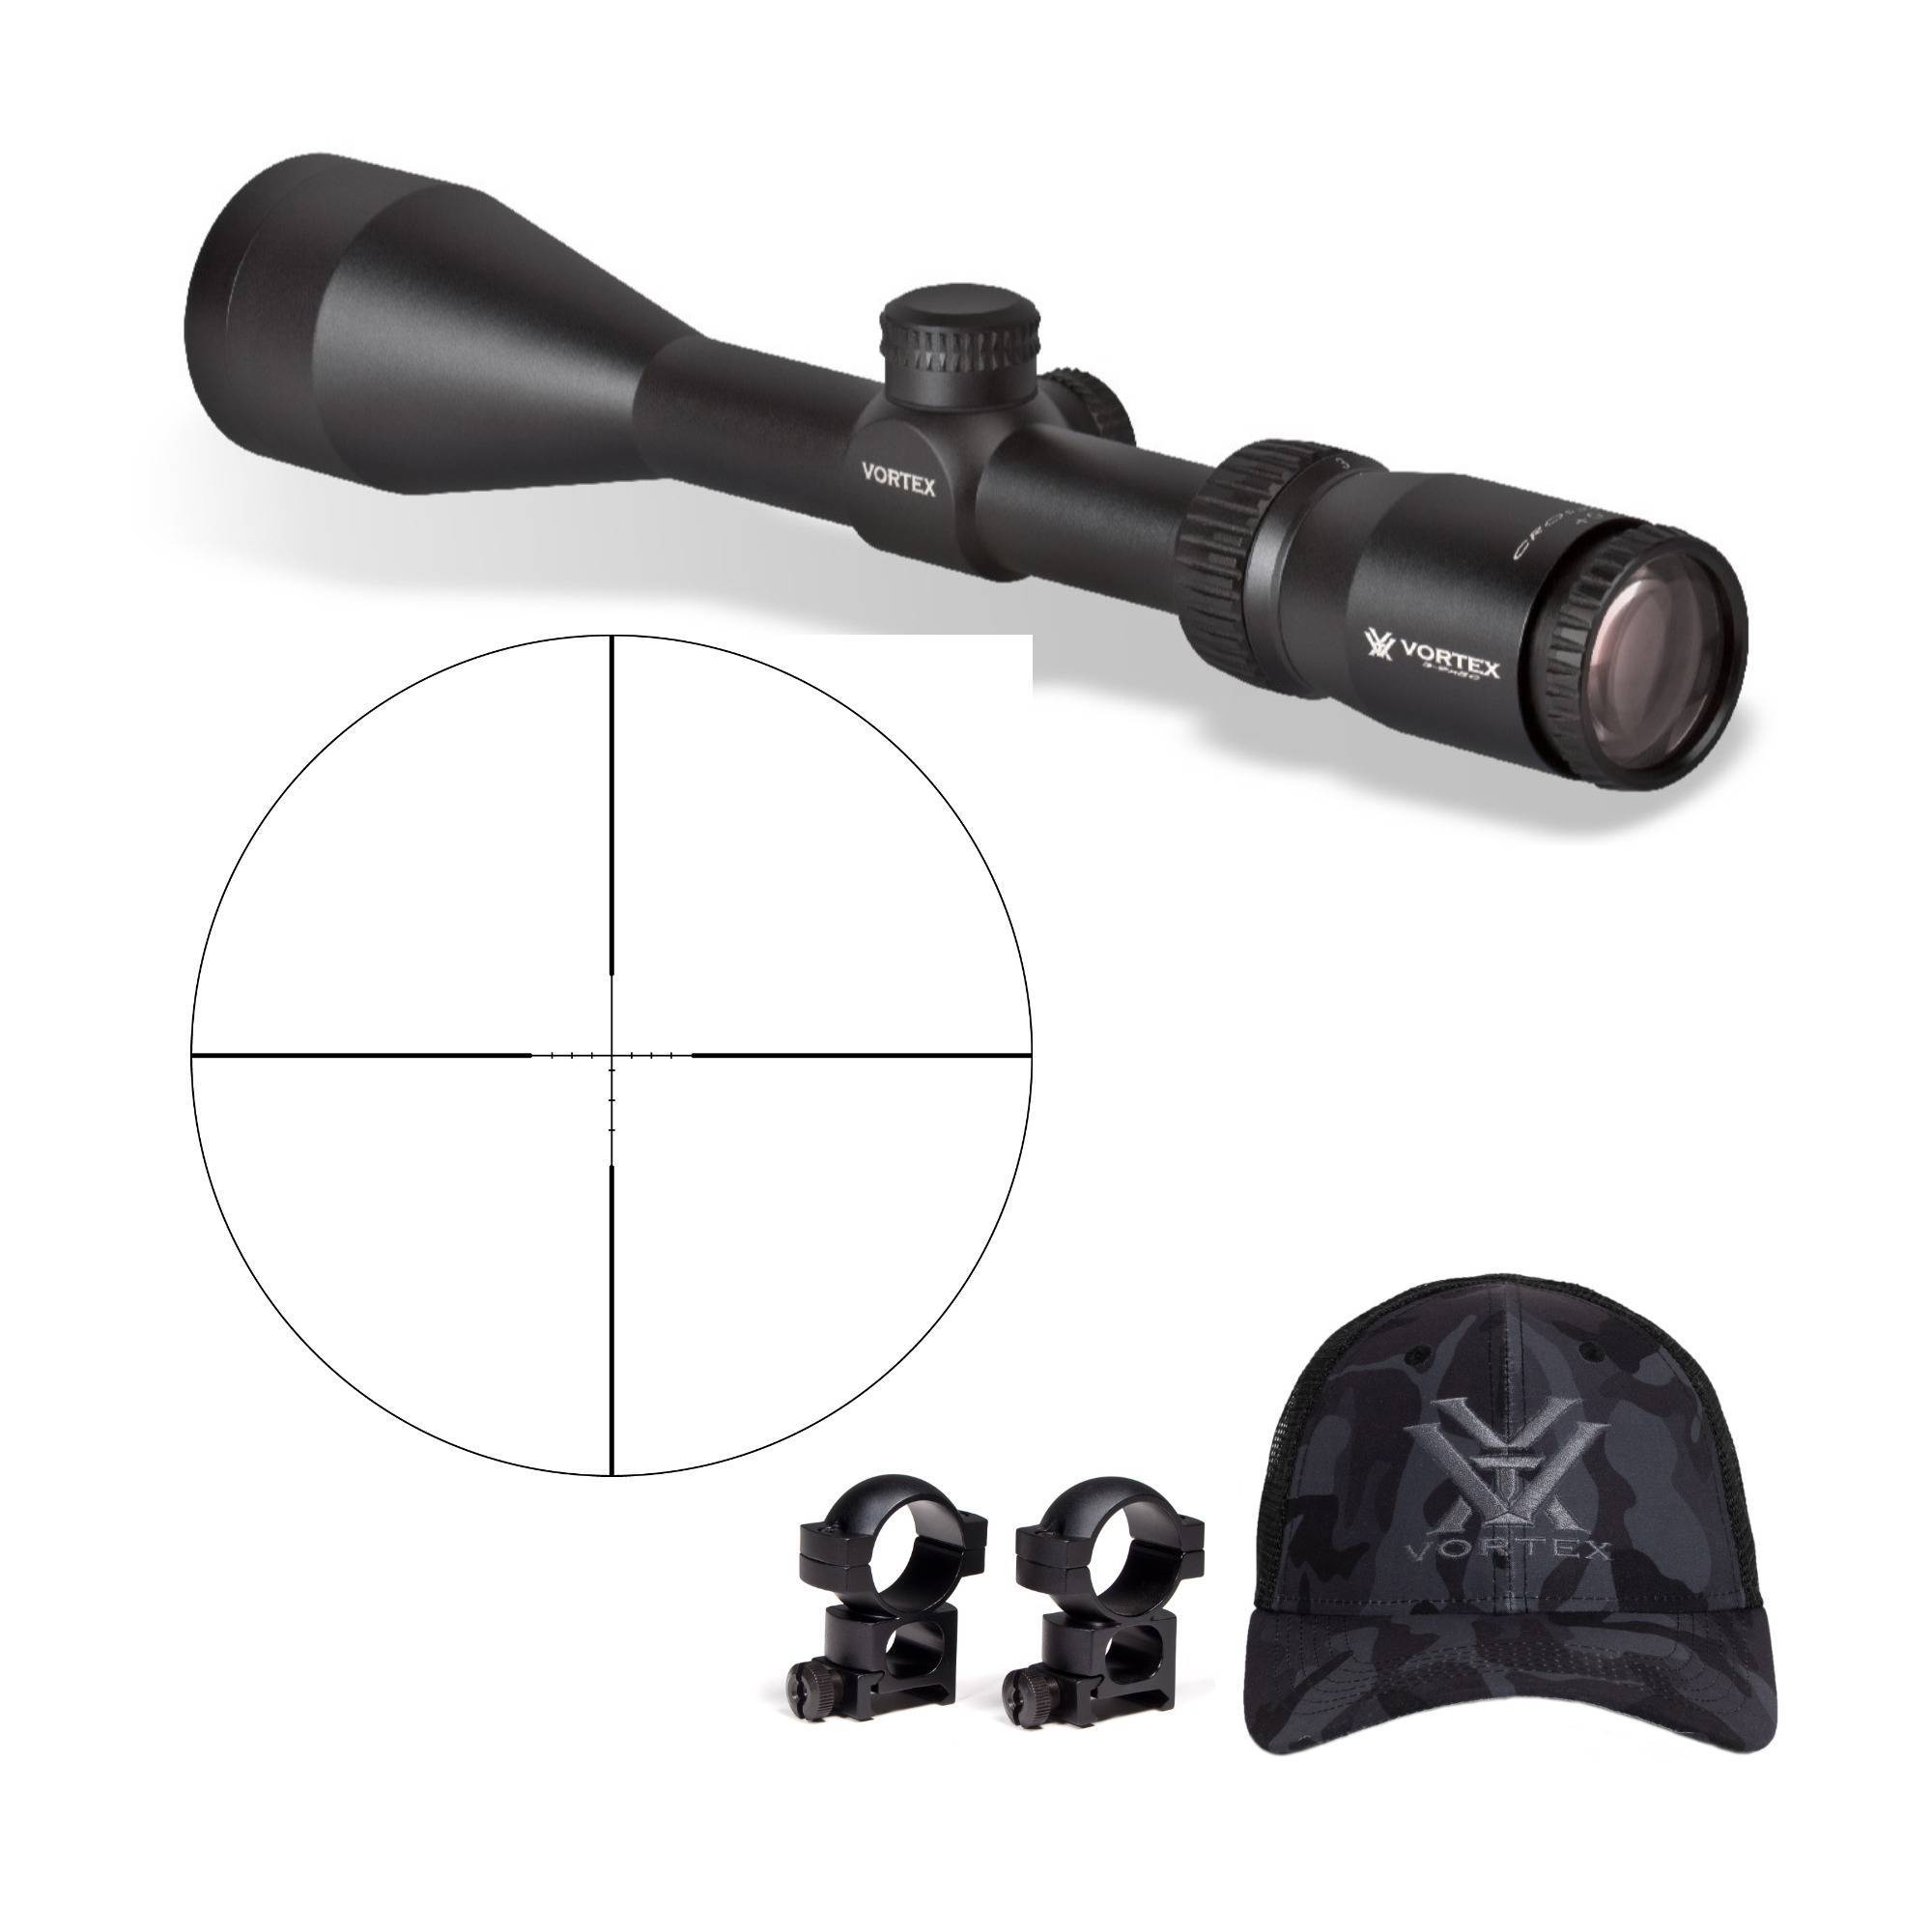 Vortex Crossfire II 3-9x50 Riflescope (Dead-Hold BDC MOA Reticle) with 1in Riflescope Rings and Hat